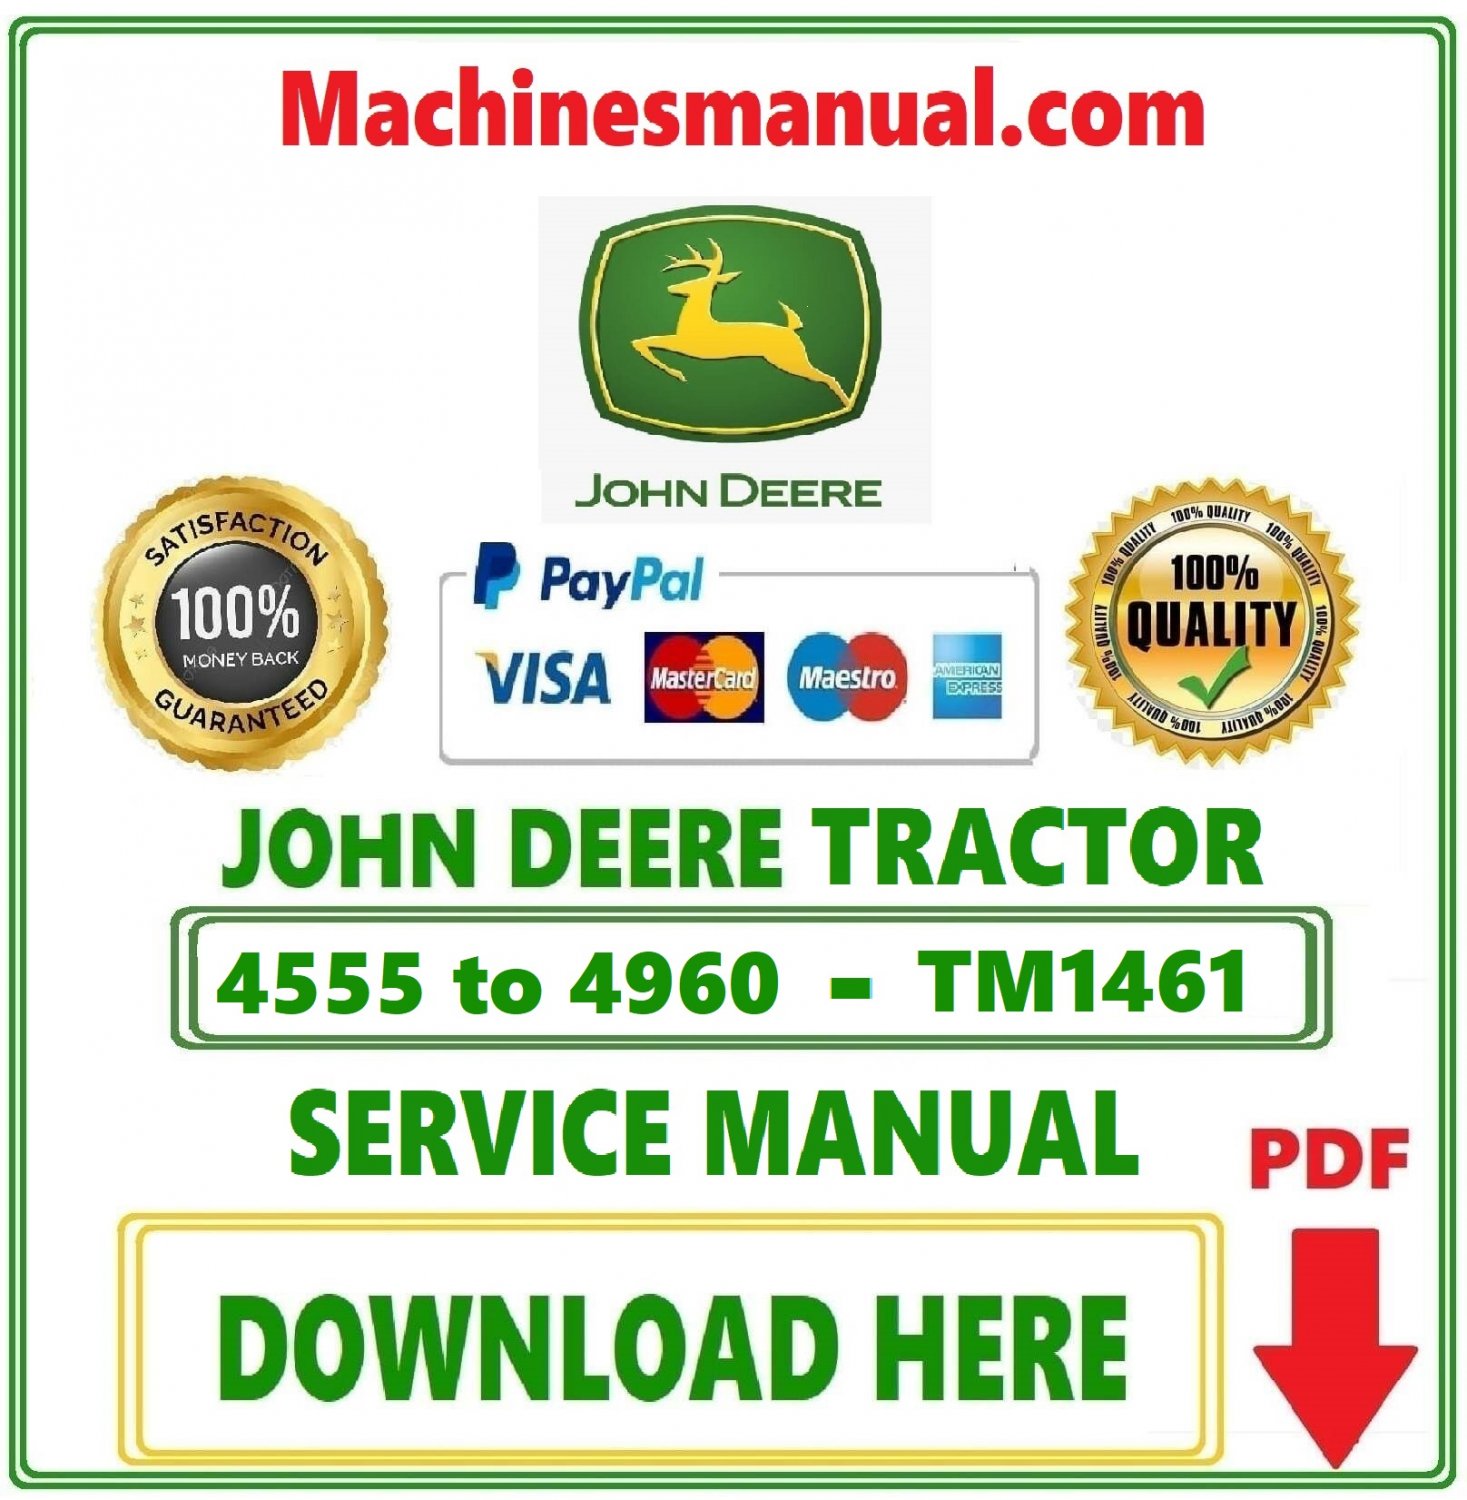 John Deere 4555 to 4960 Tractor Diagnosis and Test Service Manual Download Pdf-TM1461